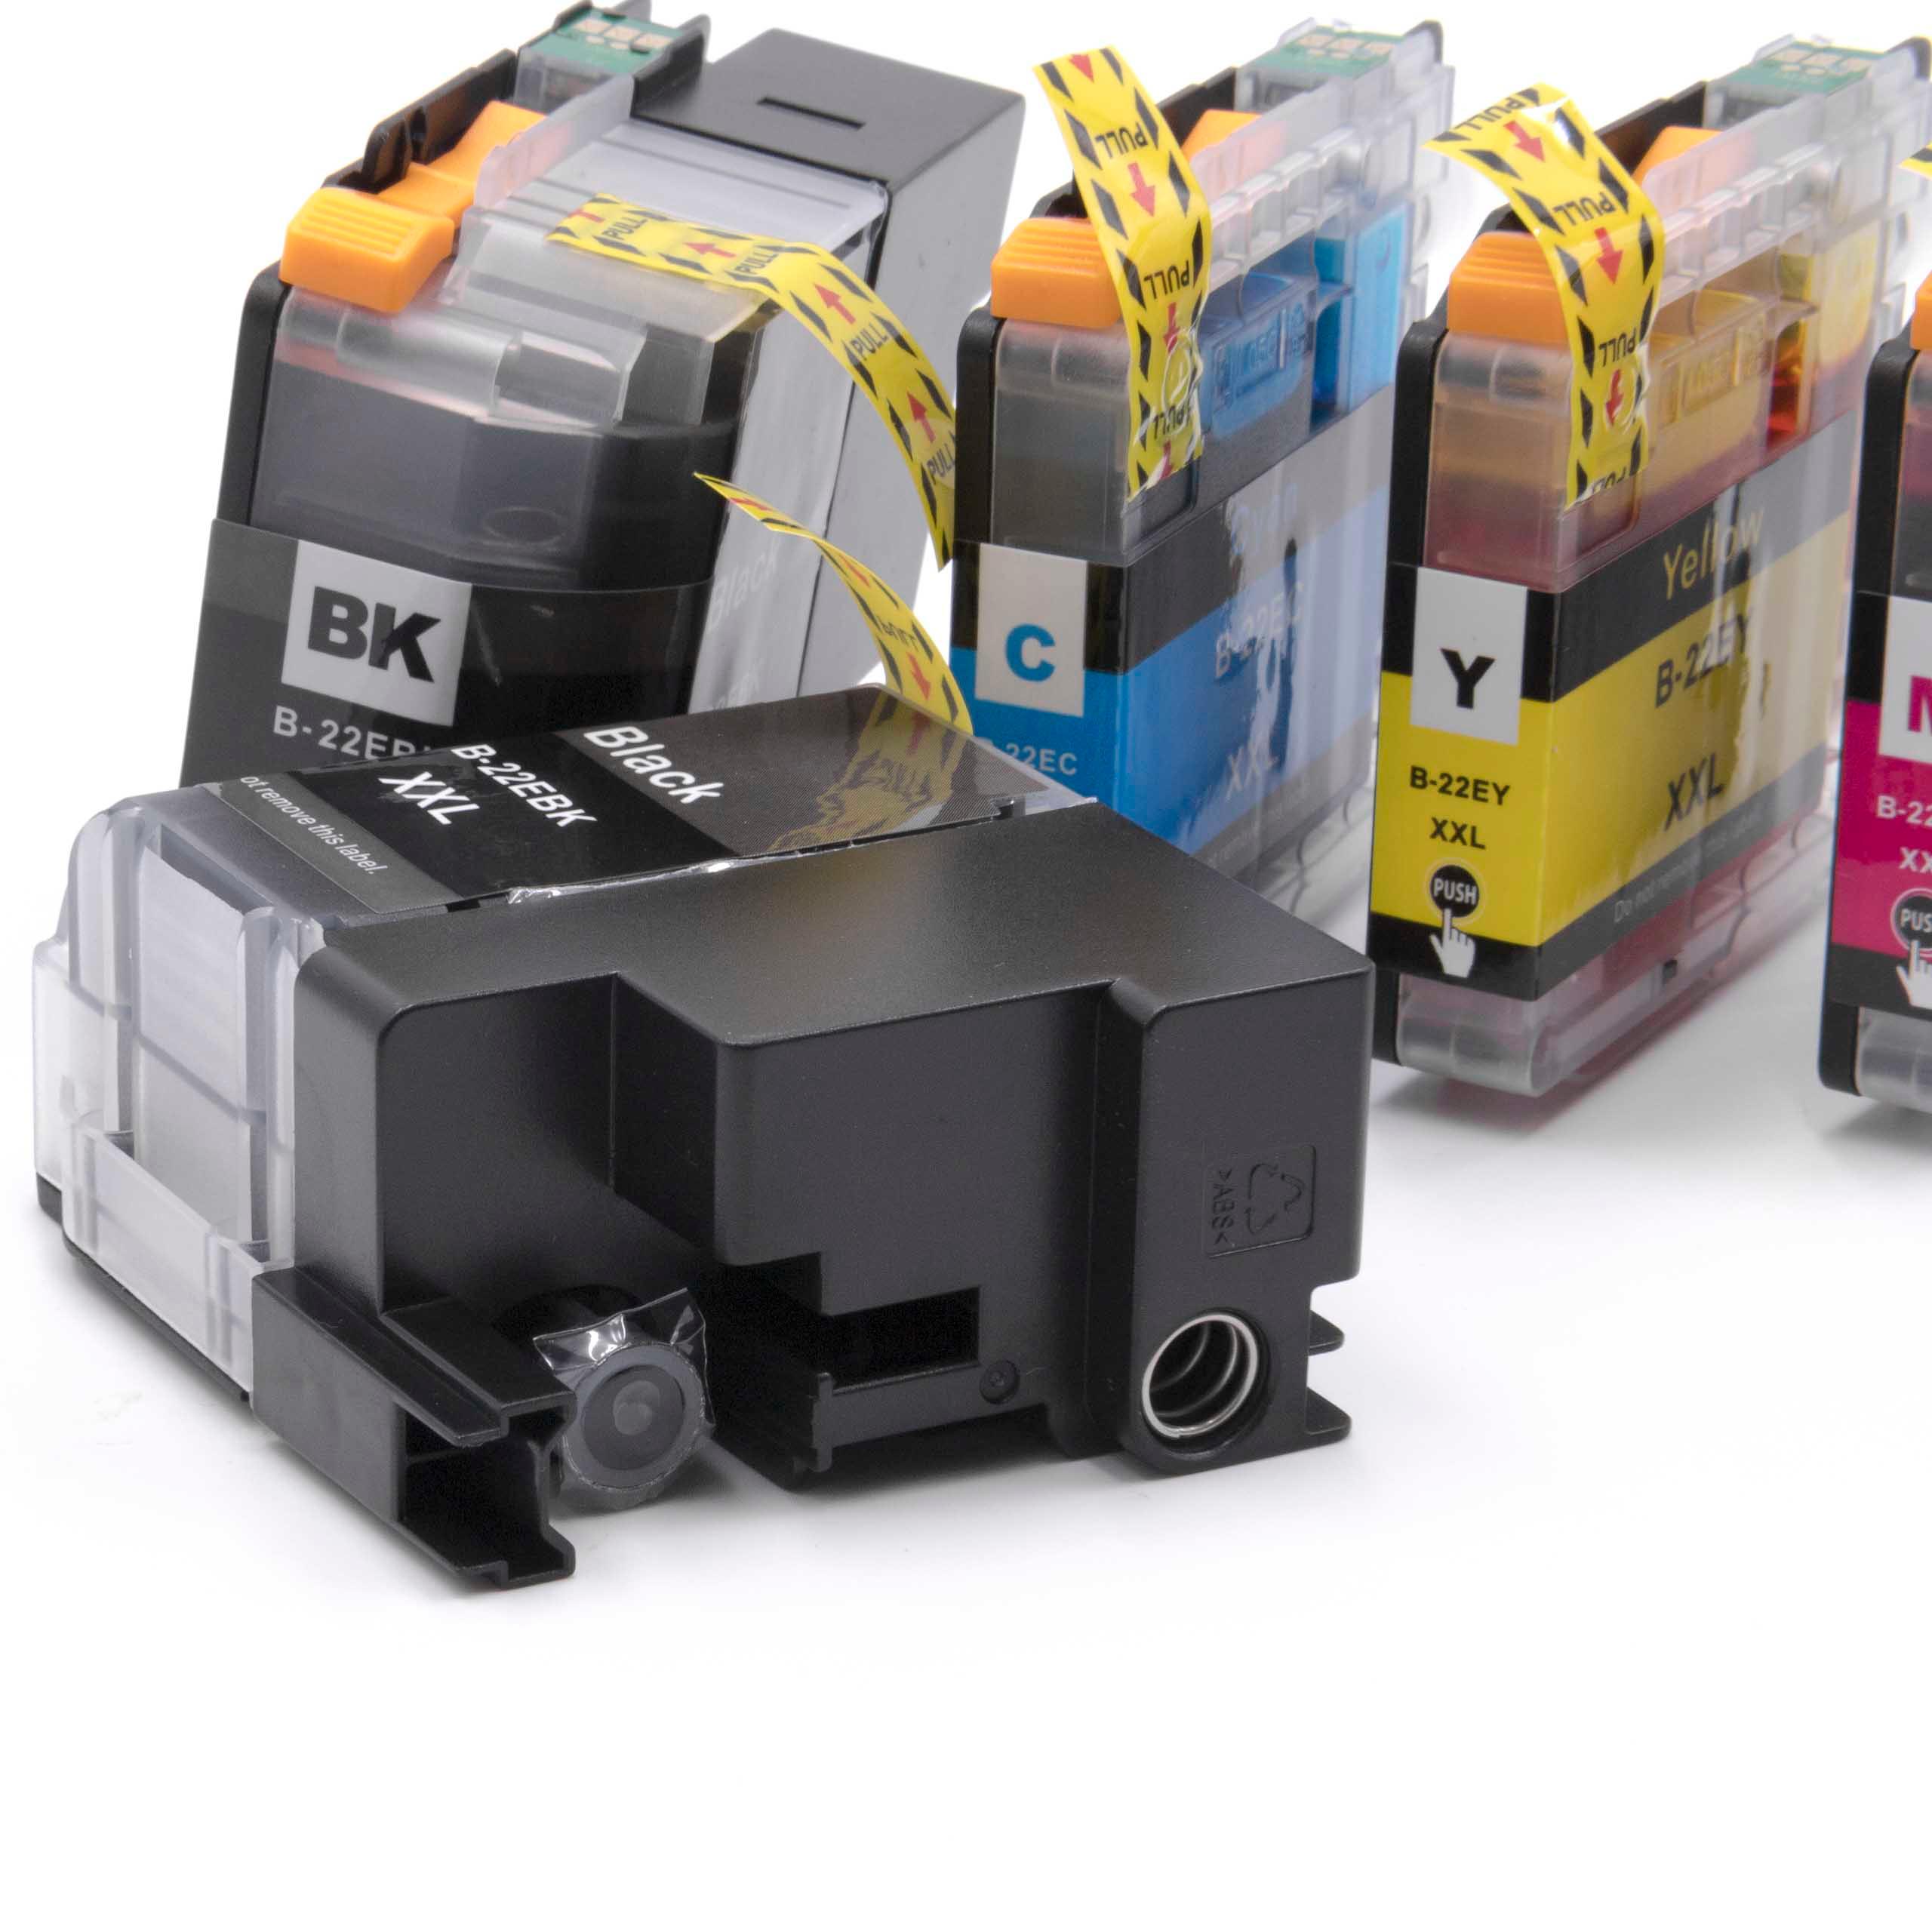 5x Ink Cartridges replaces Brother LC-22EBK, LC22EBK, LC-22EBKXXL, LC-22E BK for MFC-J5920DW Printer - B/C/M/Y